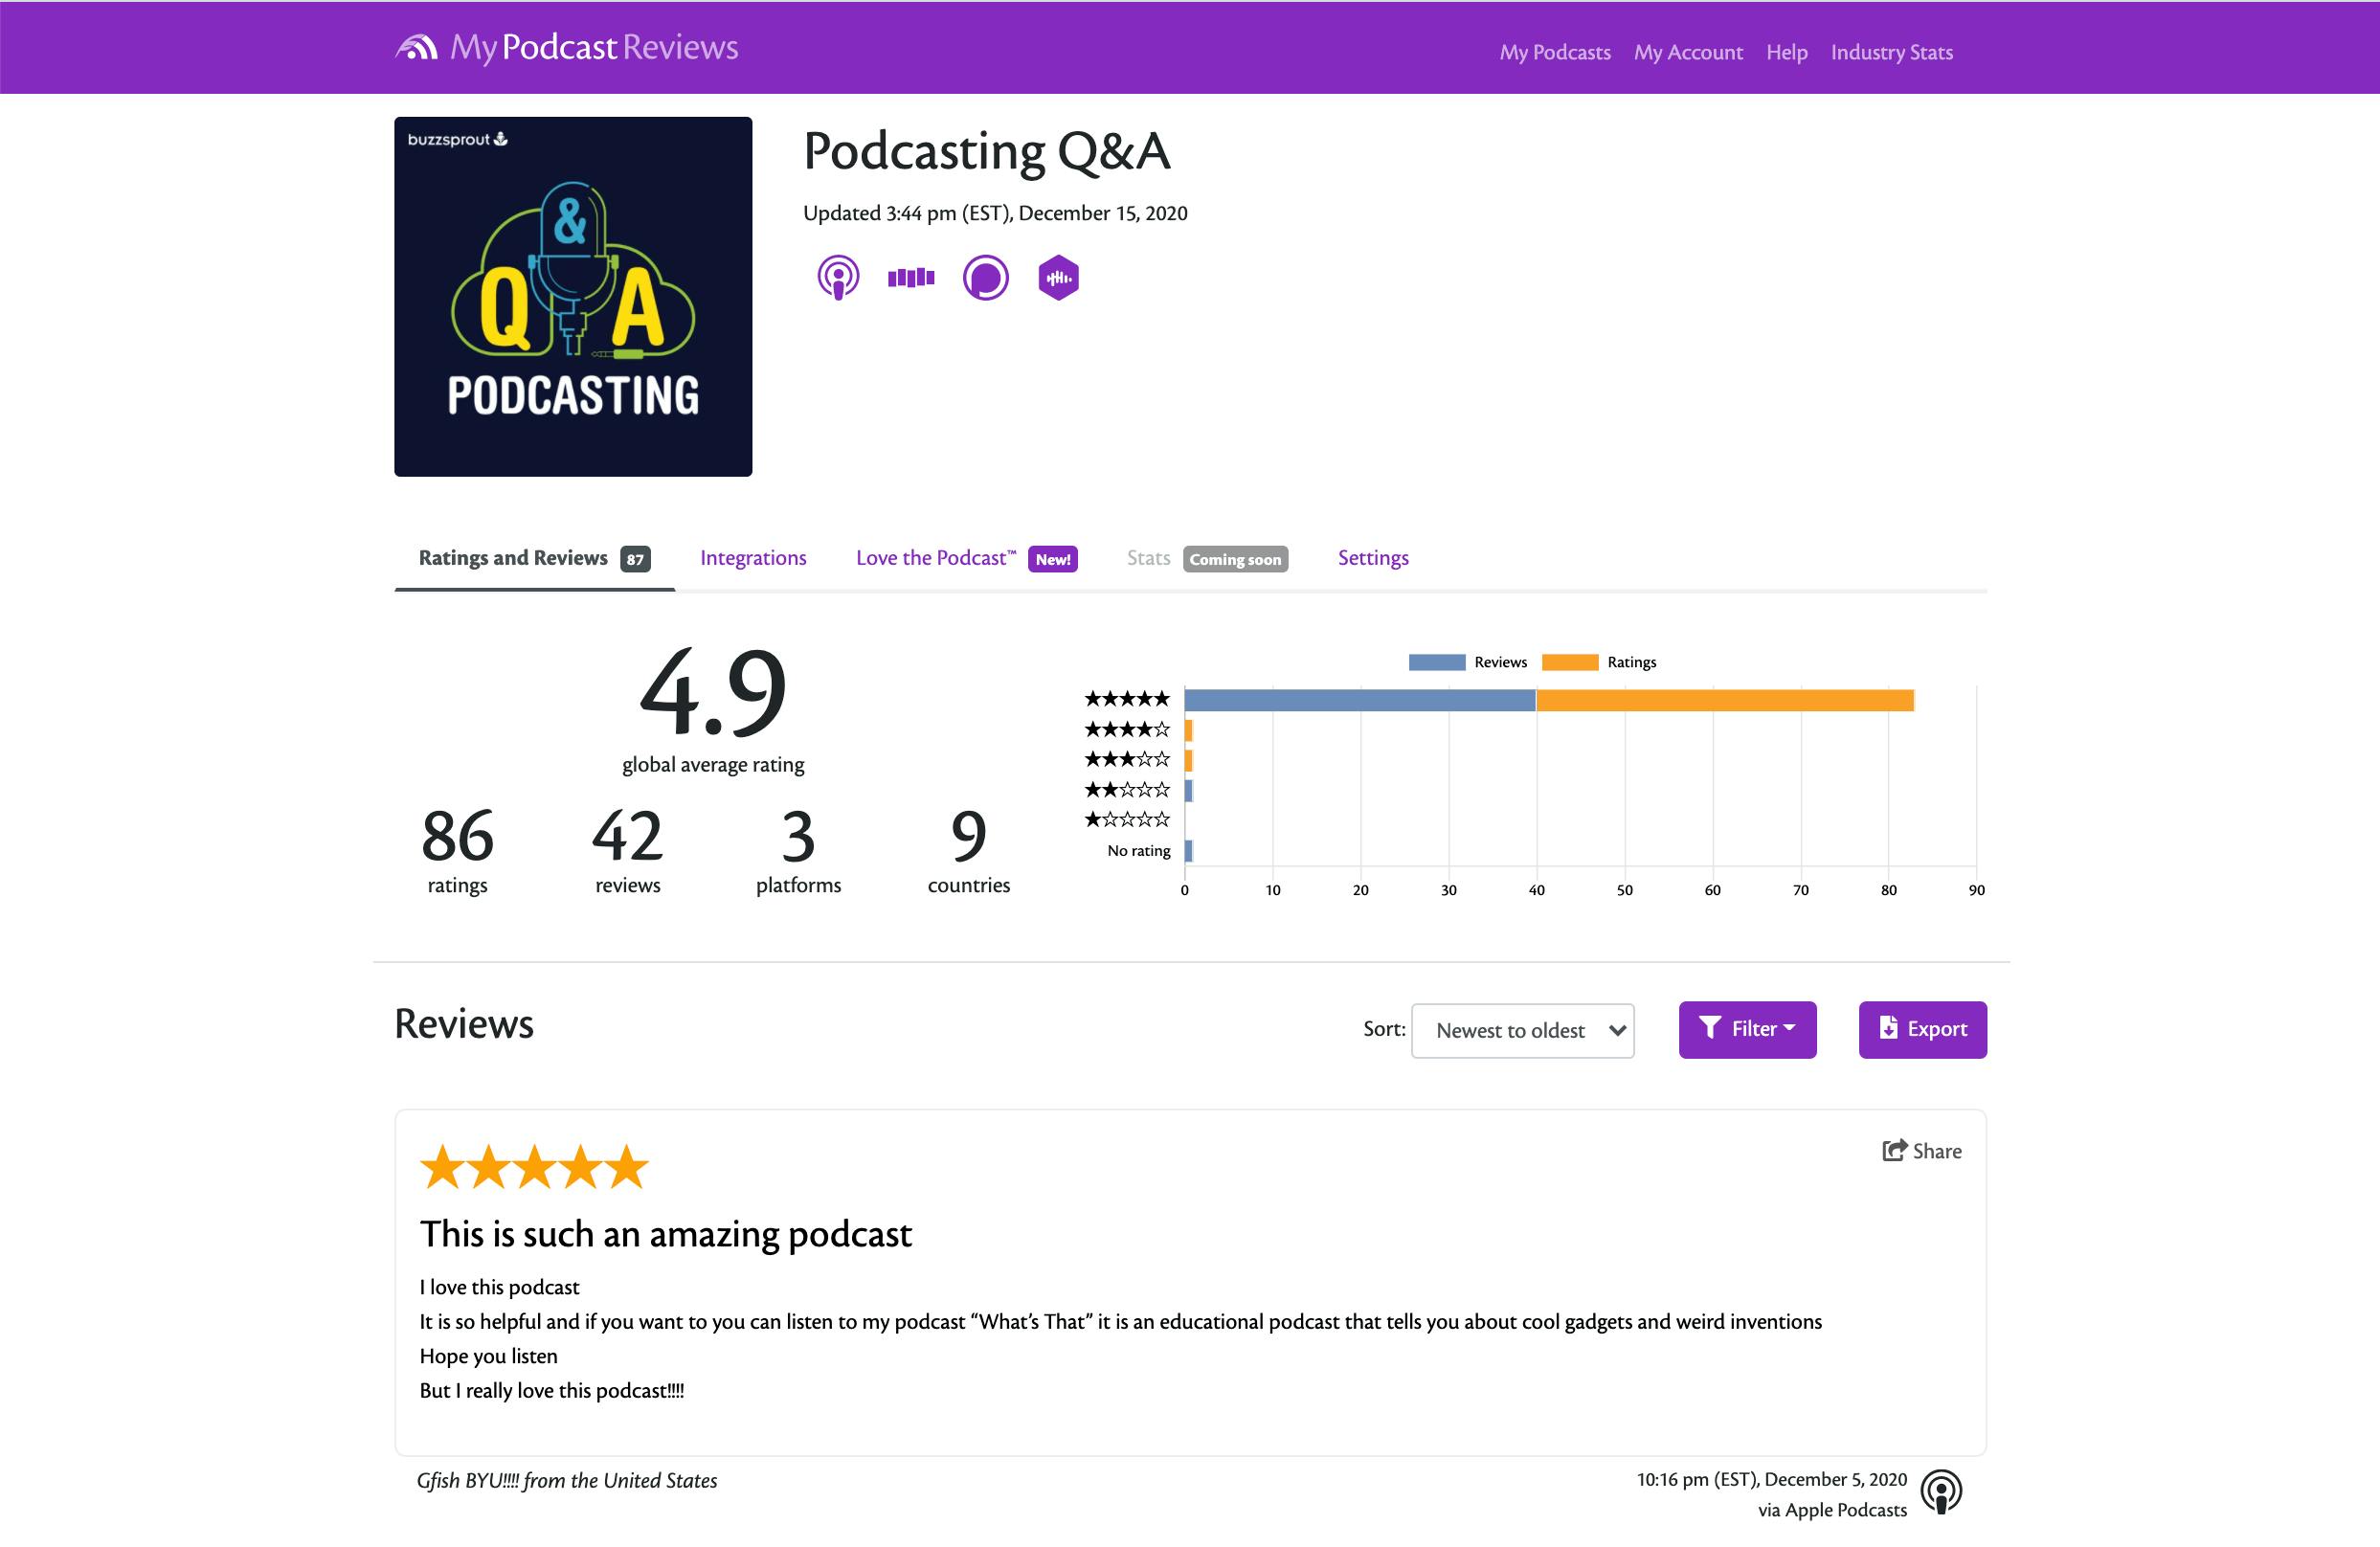 MyPodcastReviews page for Podcasting Q&A